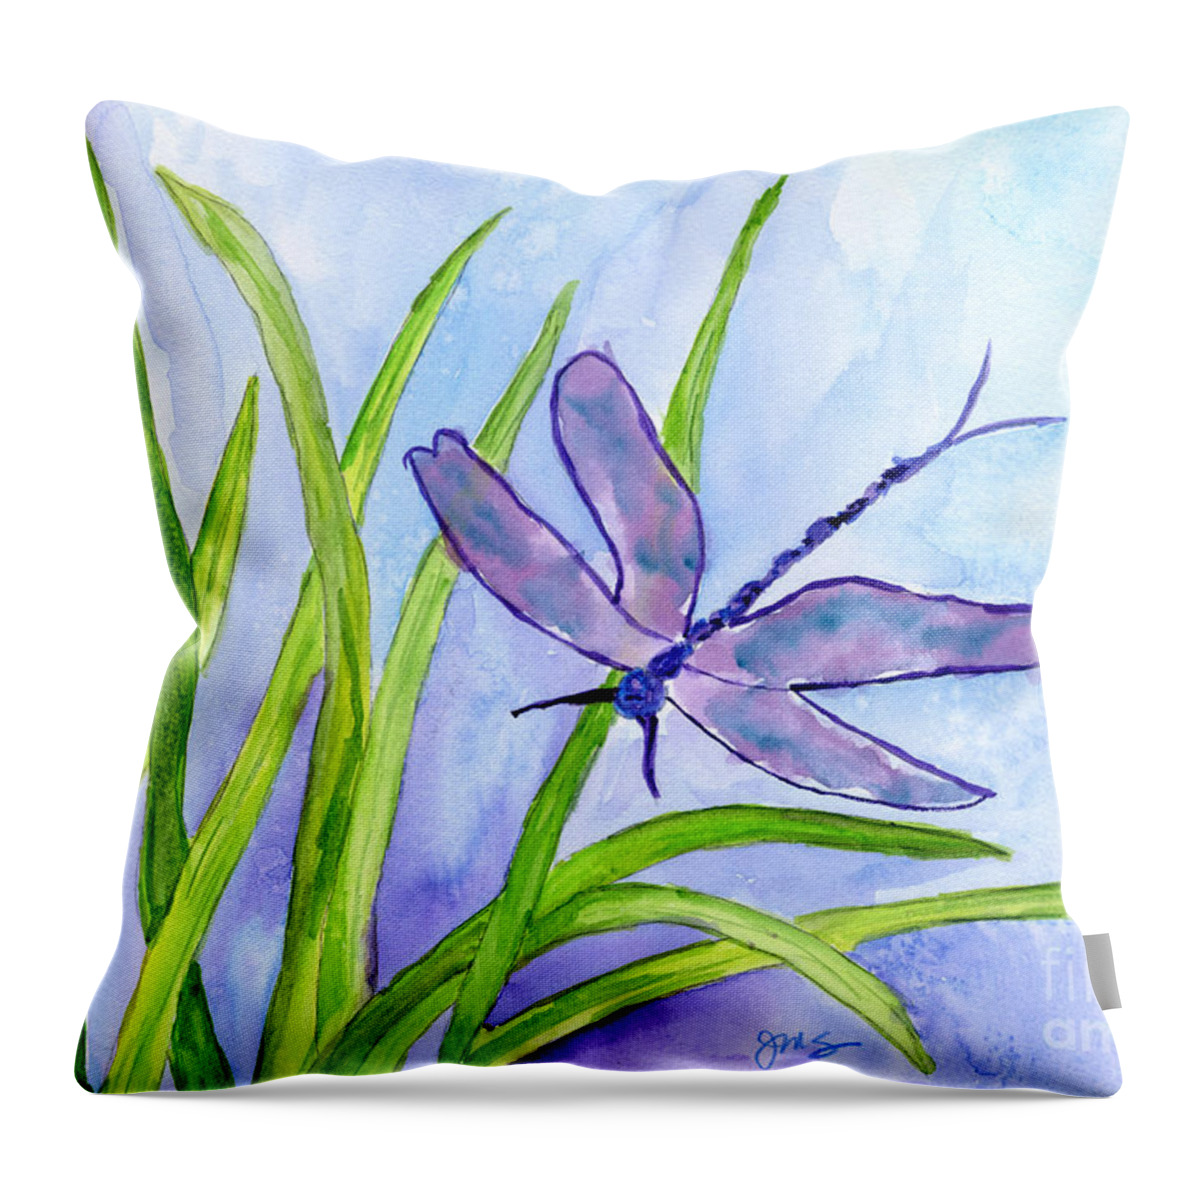 Nature Throw Pillow featuring the painting Dragonfly by Julia Stubbe